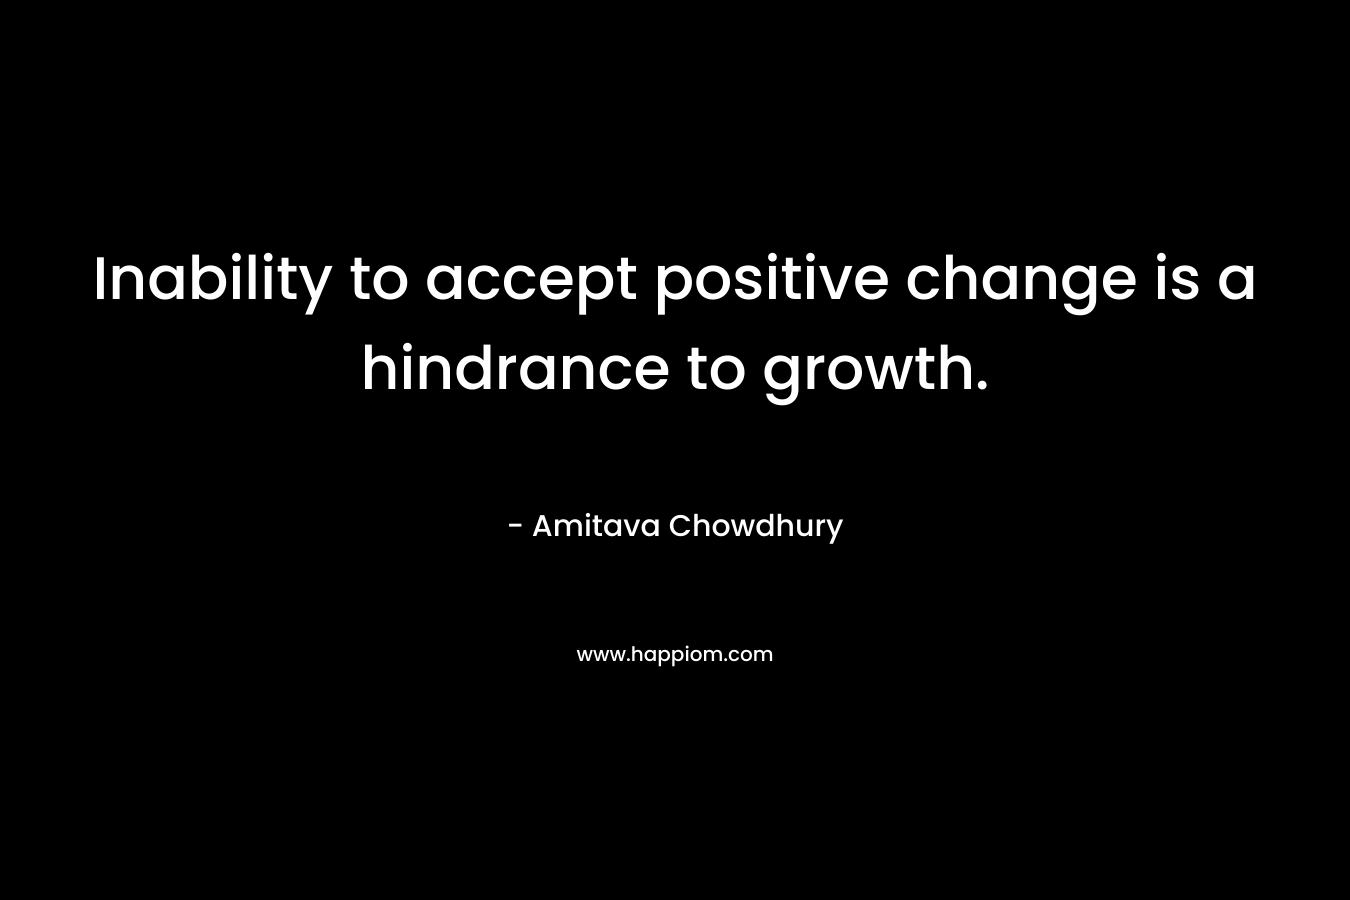 Inability to accept positive change is a hindrance to growth. – Amitava Chowdhury